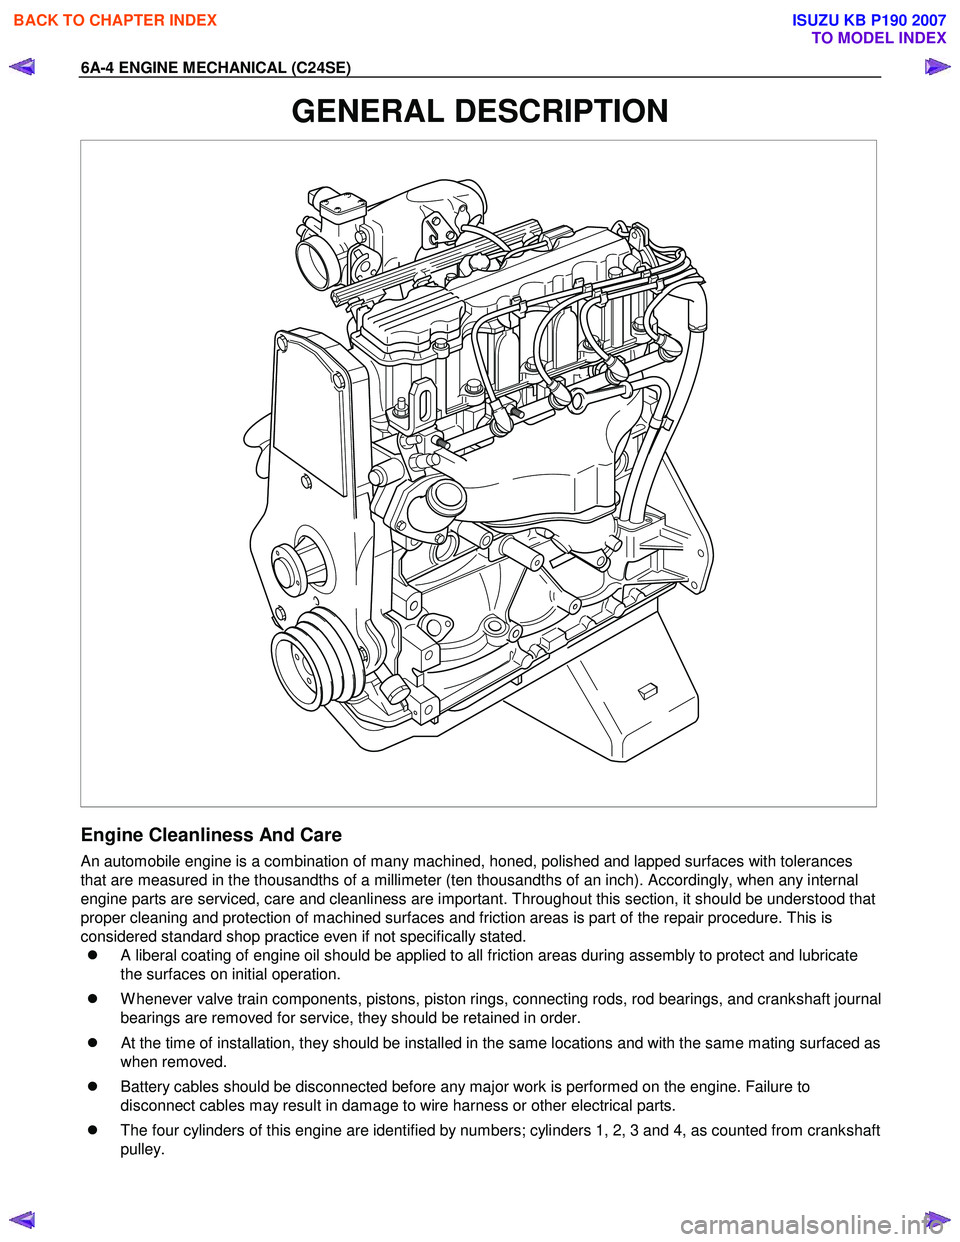 ISUZU KB P190 2007  Workshop Repair Manual 6A-4 ENGINE MECHANICAL (C24SE) 
GENERAL DESCRIPTION 
 
Engine Cleanliness And Care 
An automobile engine is a combination of many machined, honed, polished and lapped surfaces with tolerances  
that a